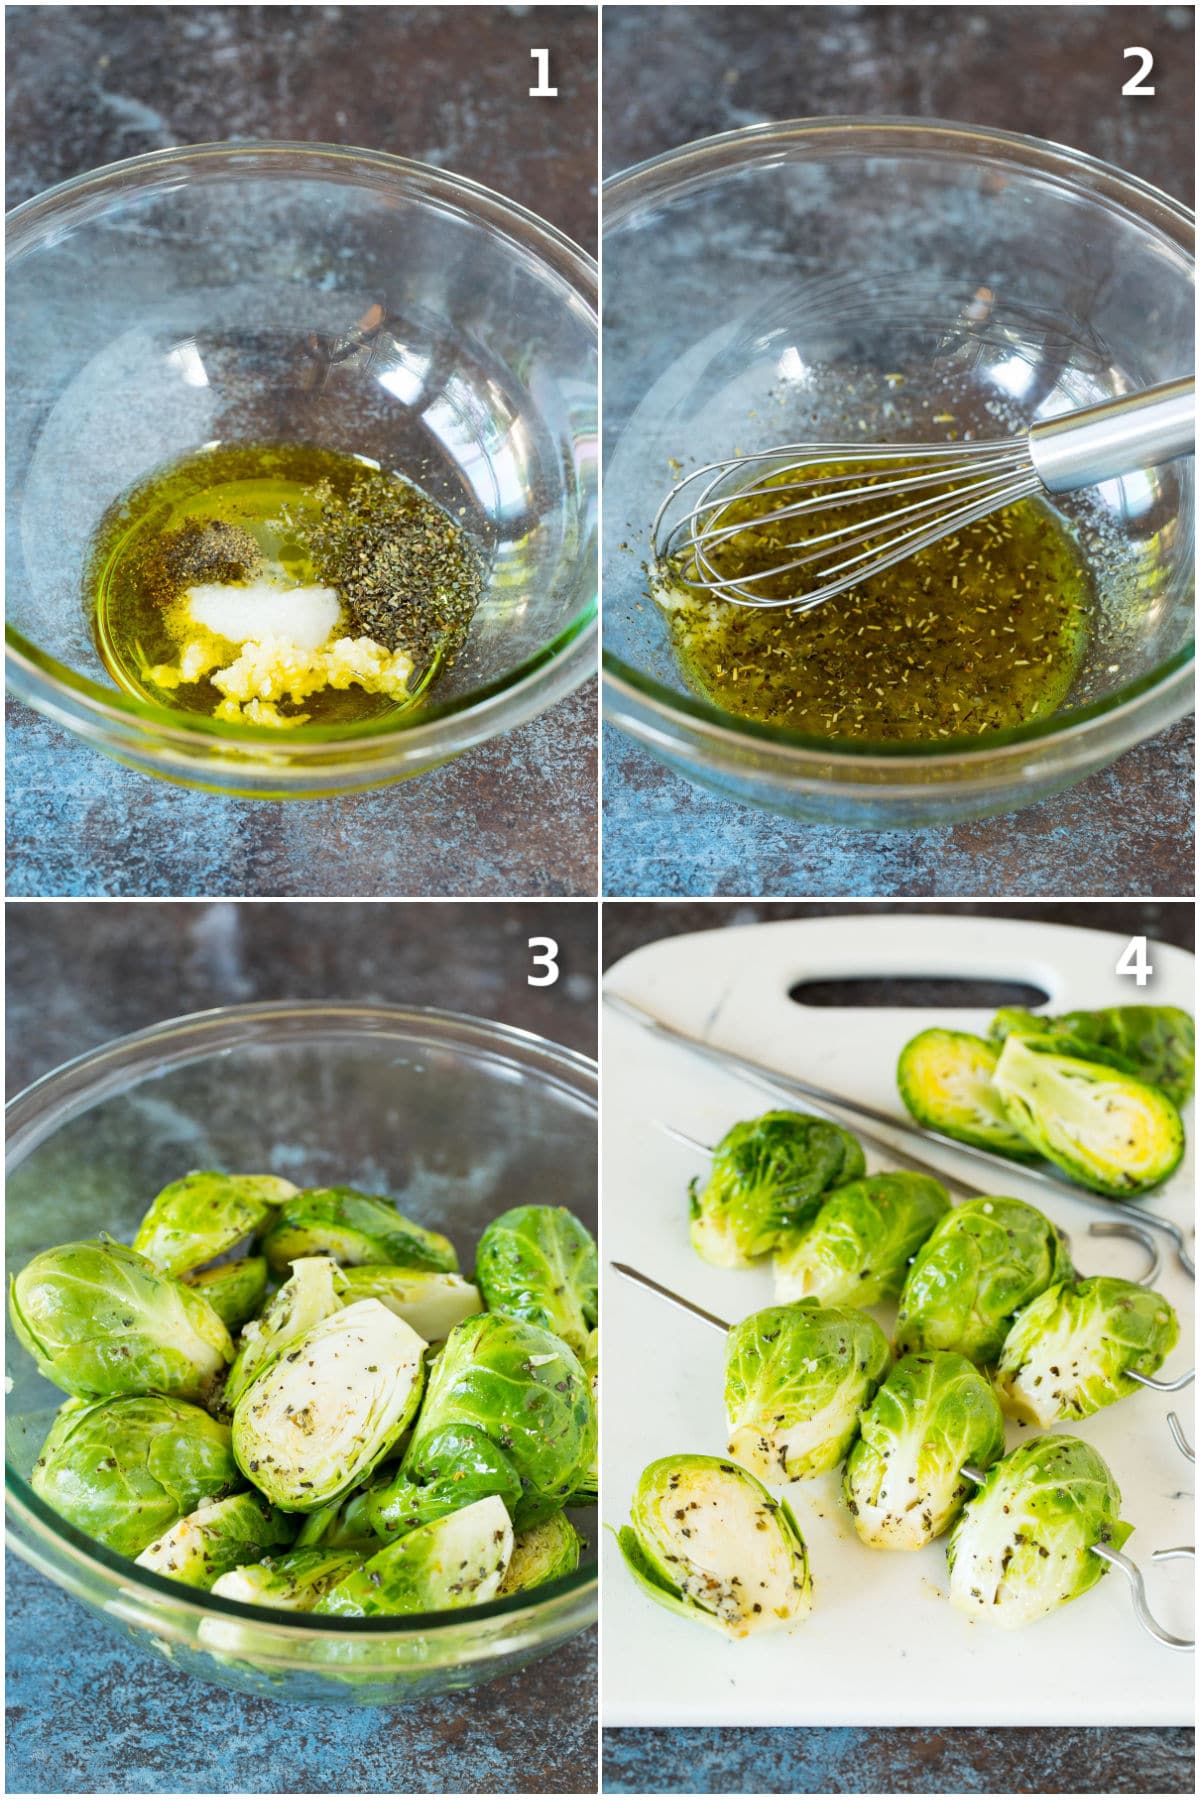 Process shots showing how to marinate brussels sprouts.